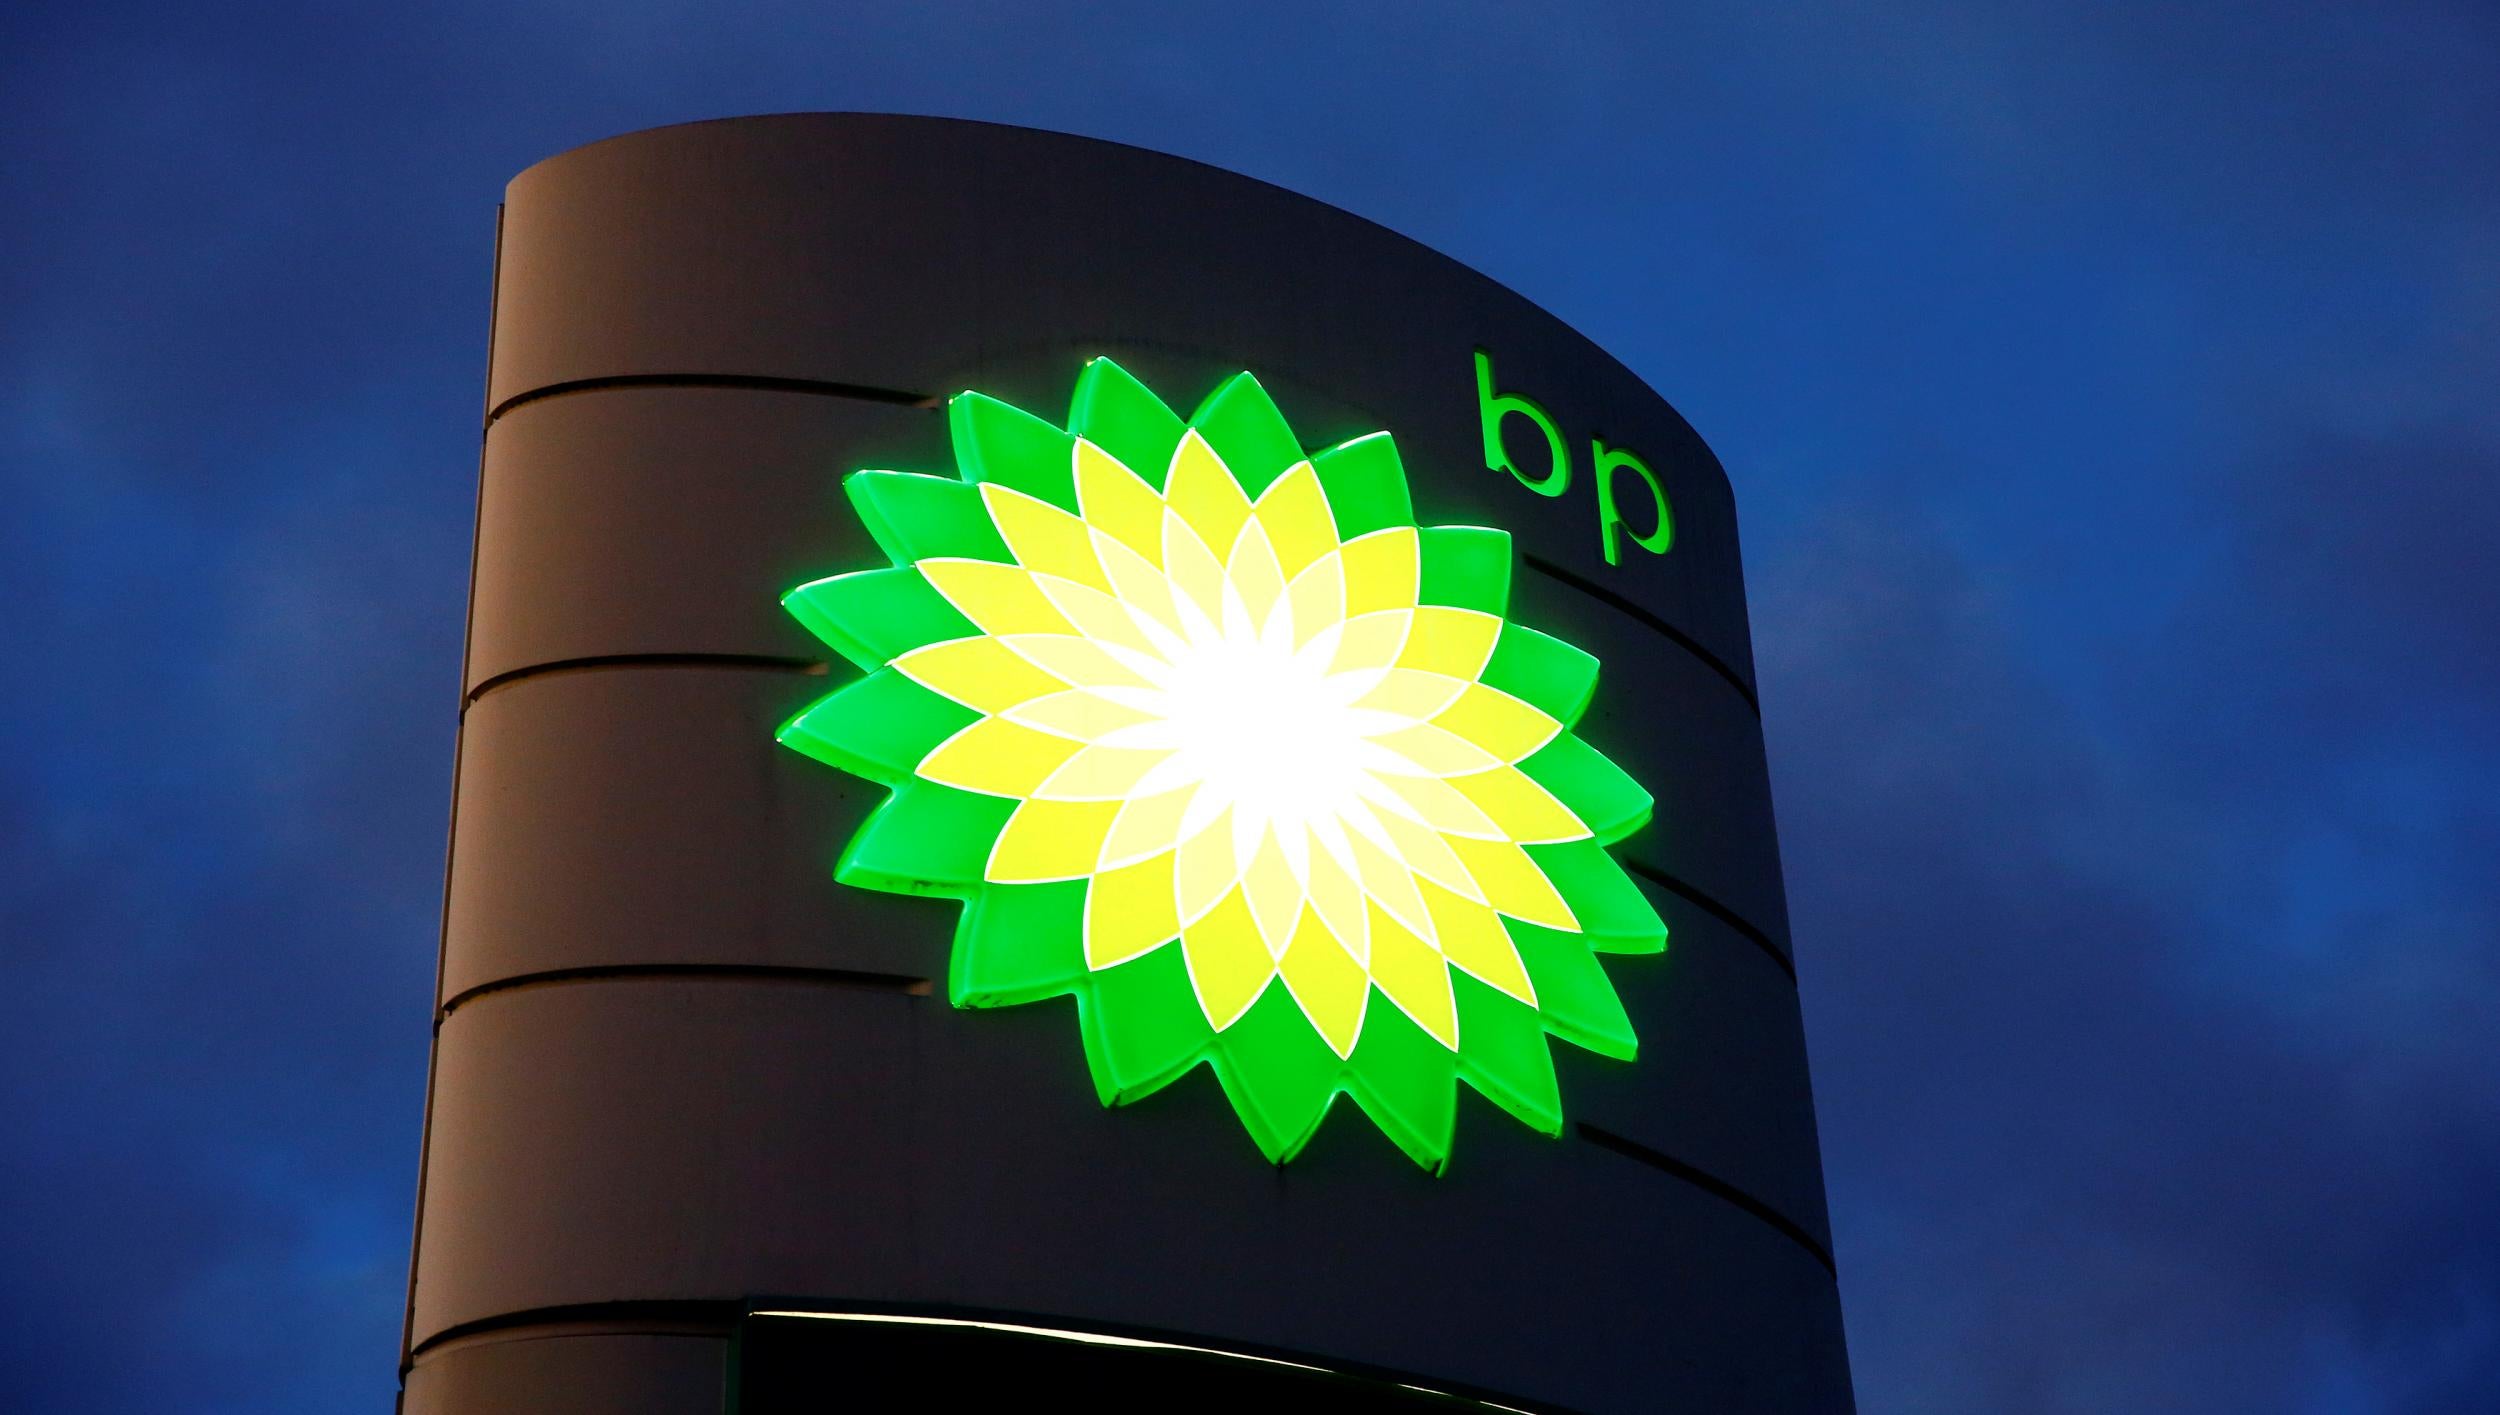 BP has large operations in oil and gas production in the Gulf of Mexico